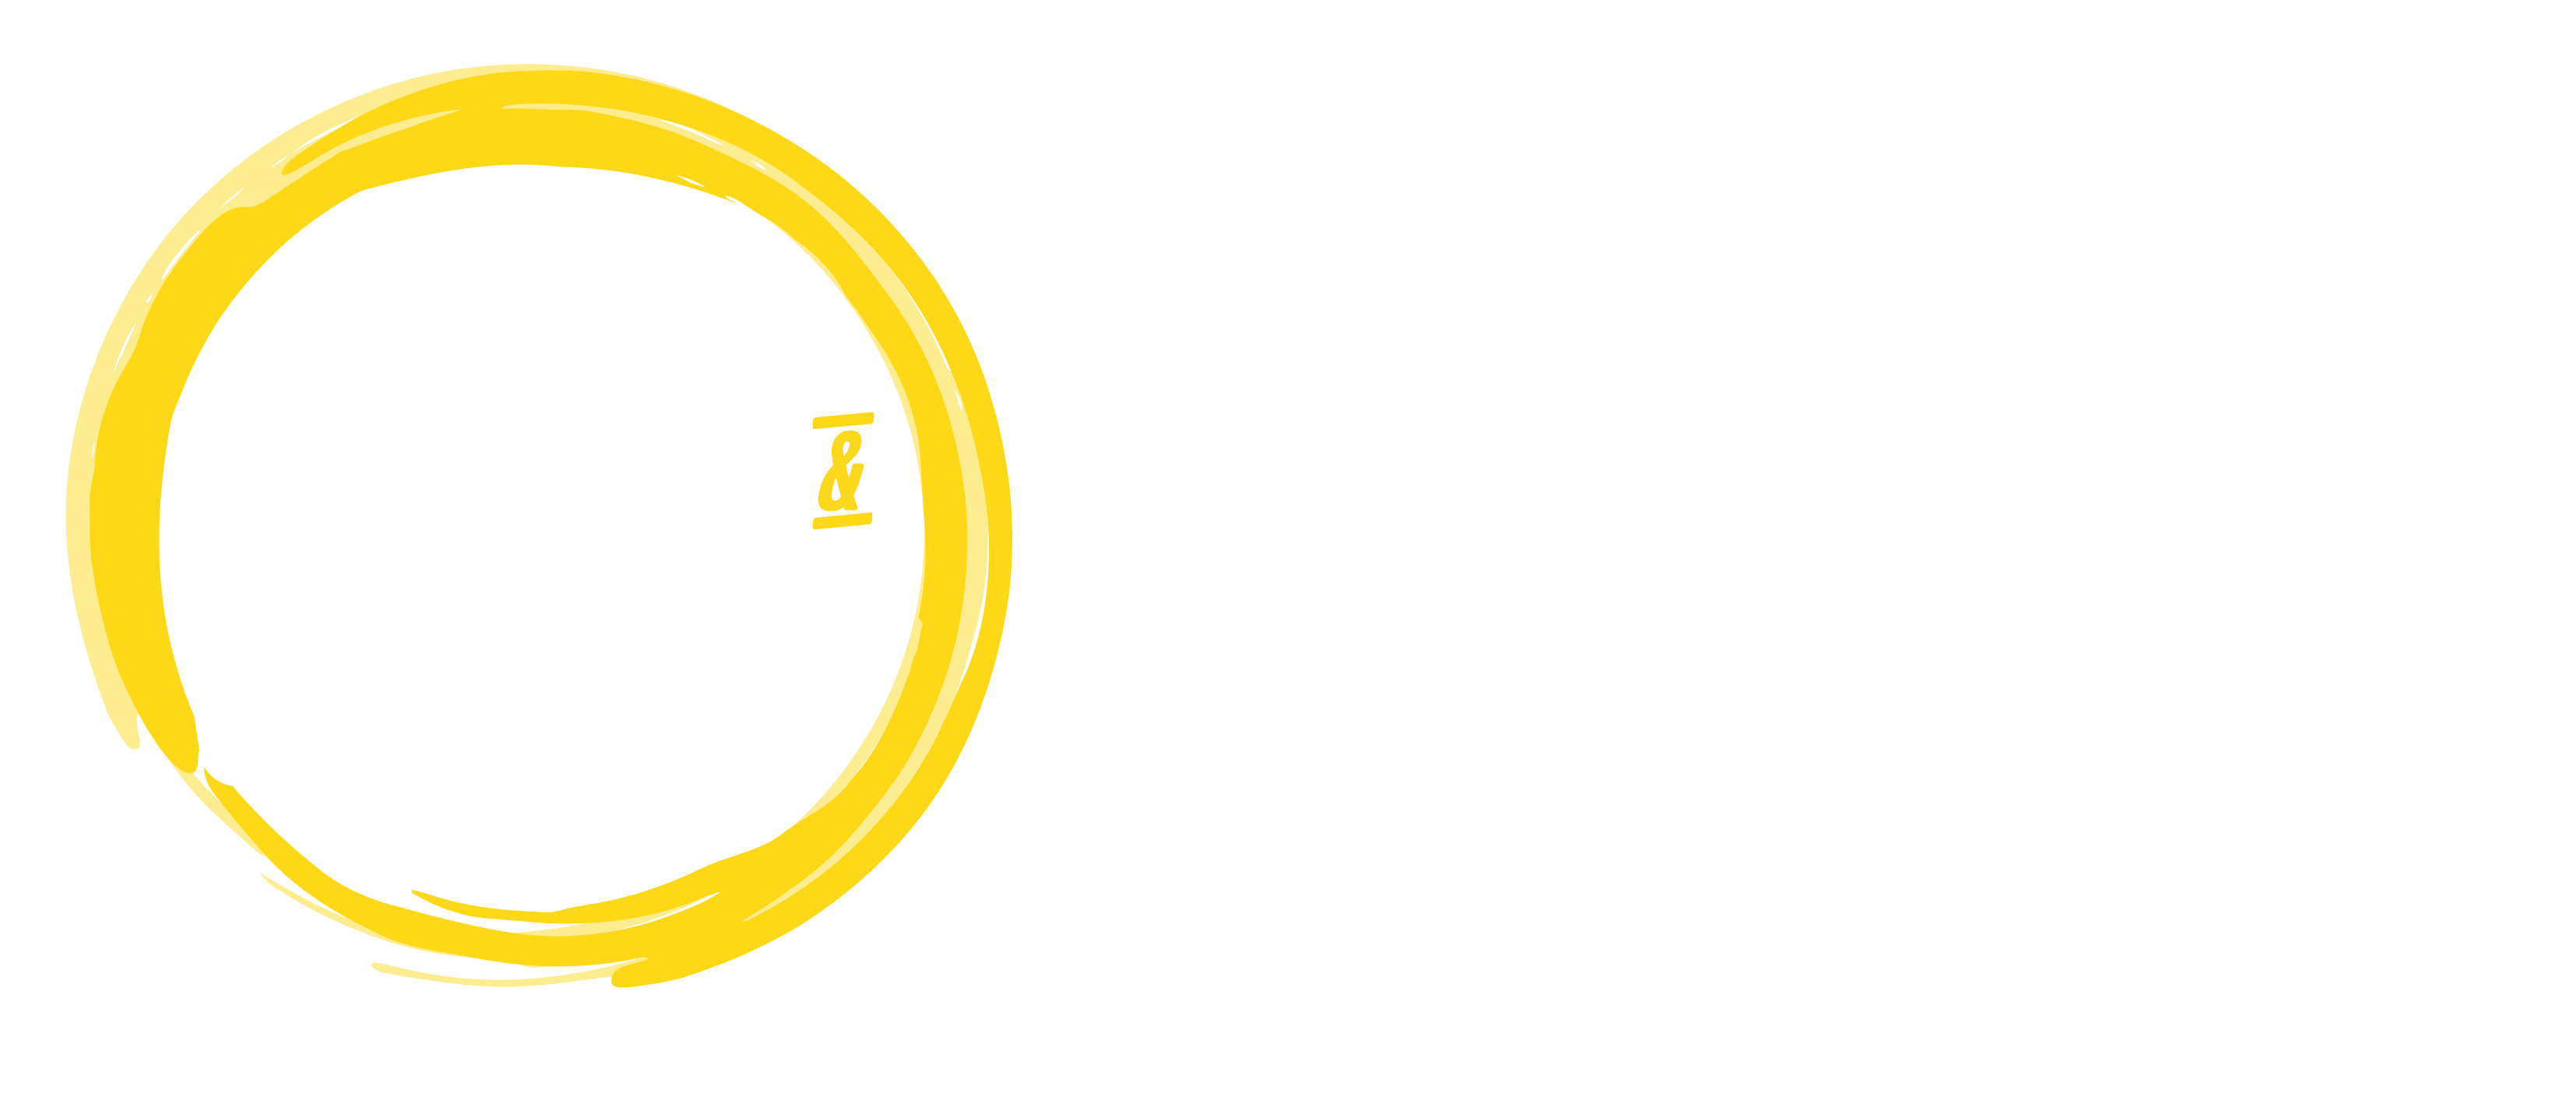 Caravan, Motorhome & Holiday Show 2025, Manchester Central 